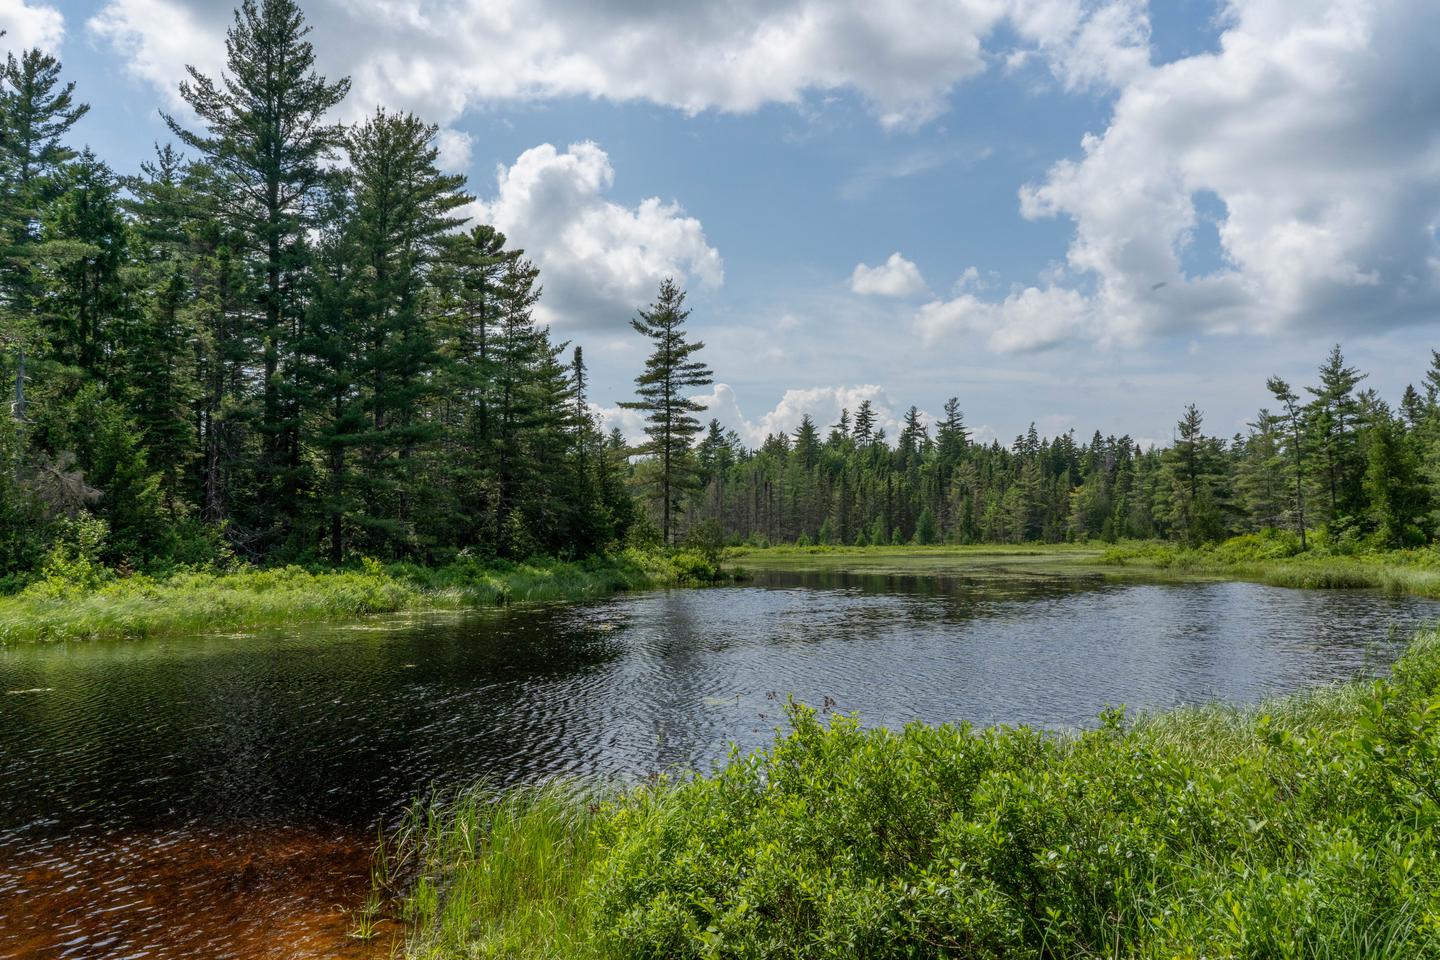 A landscape photo of Sandbank Stream. A patchy blue sky day with clouds overhead of the woods. A dark calm body of water is surrounded by vibrant green brush at the edges of the water. Tall evergreens are in the distance.A view of Sandbank Stream.